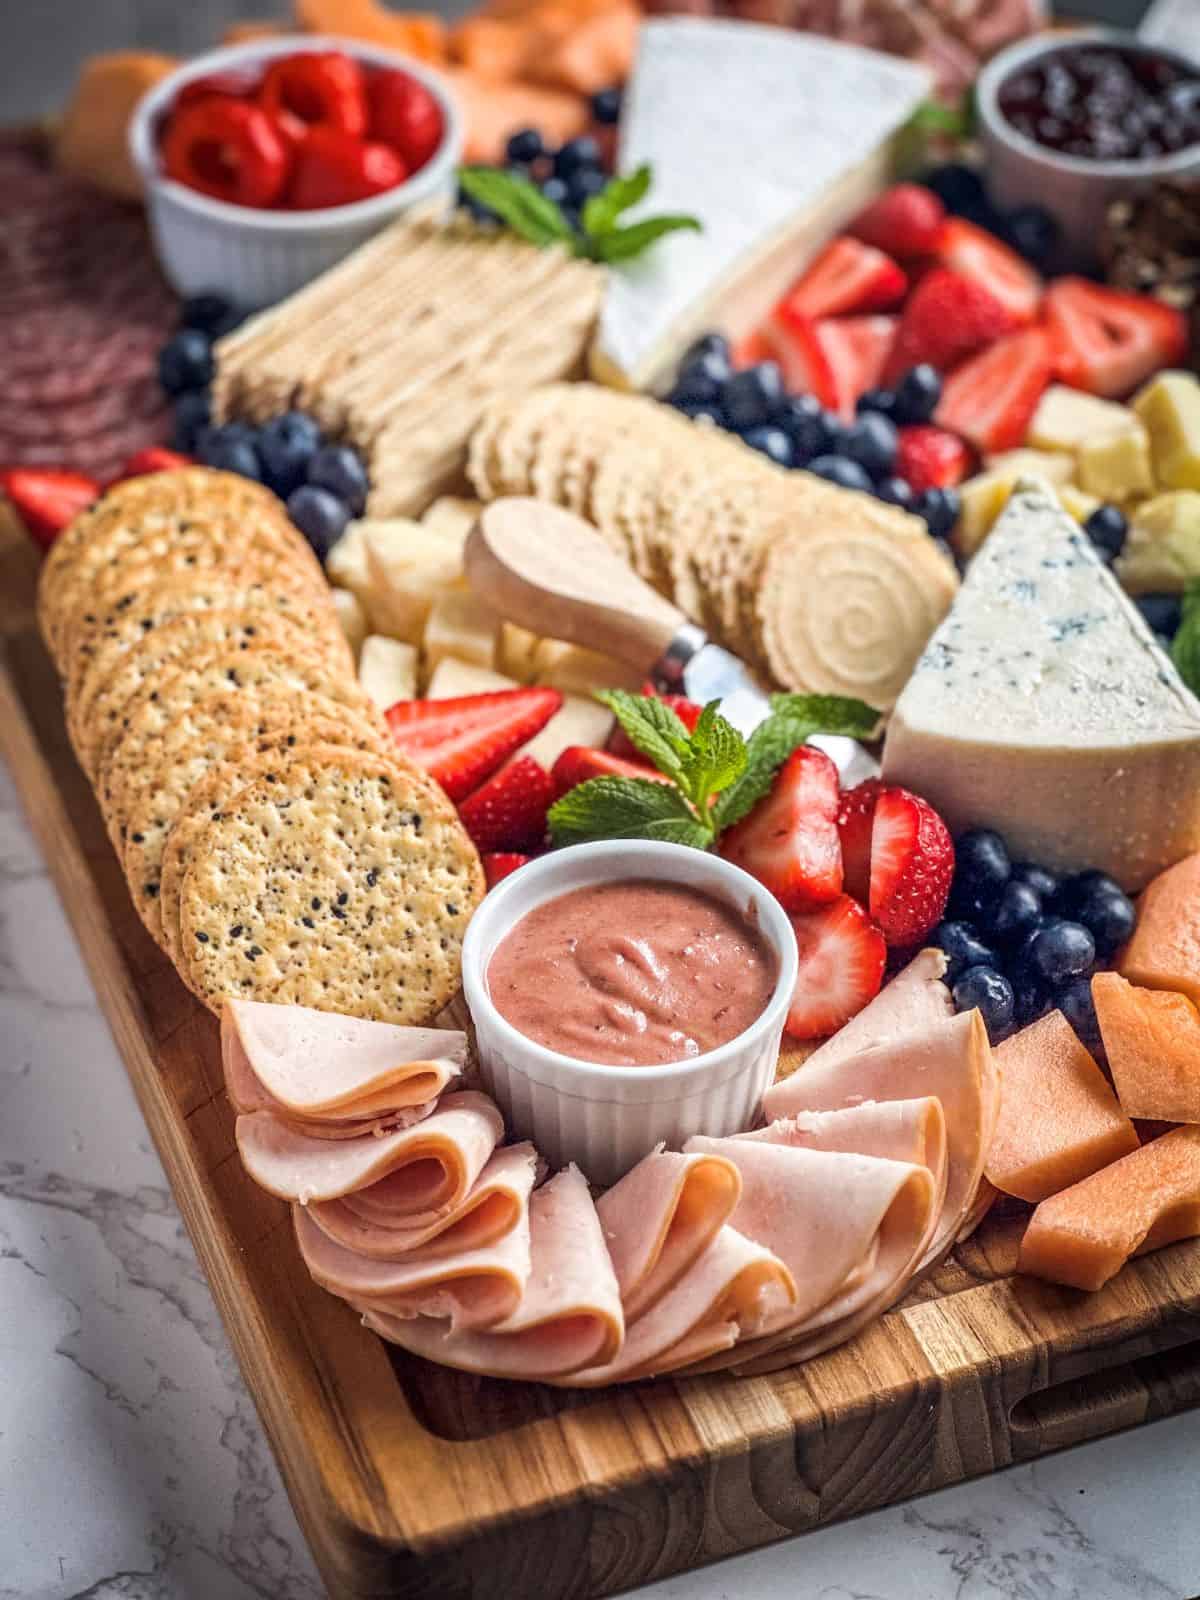 Charcuterie board spread with meats, cheese, fruit and crackers.